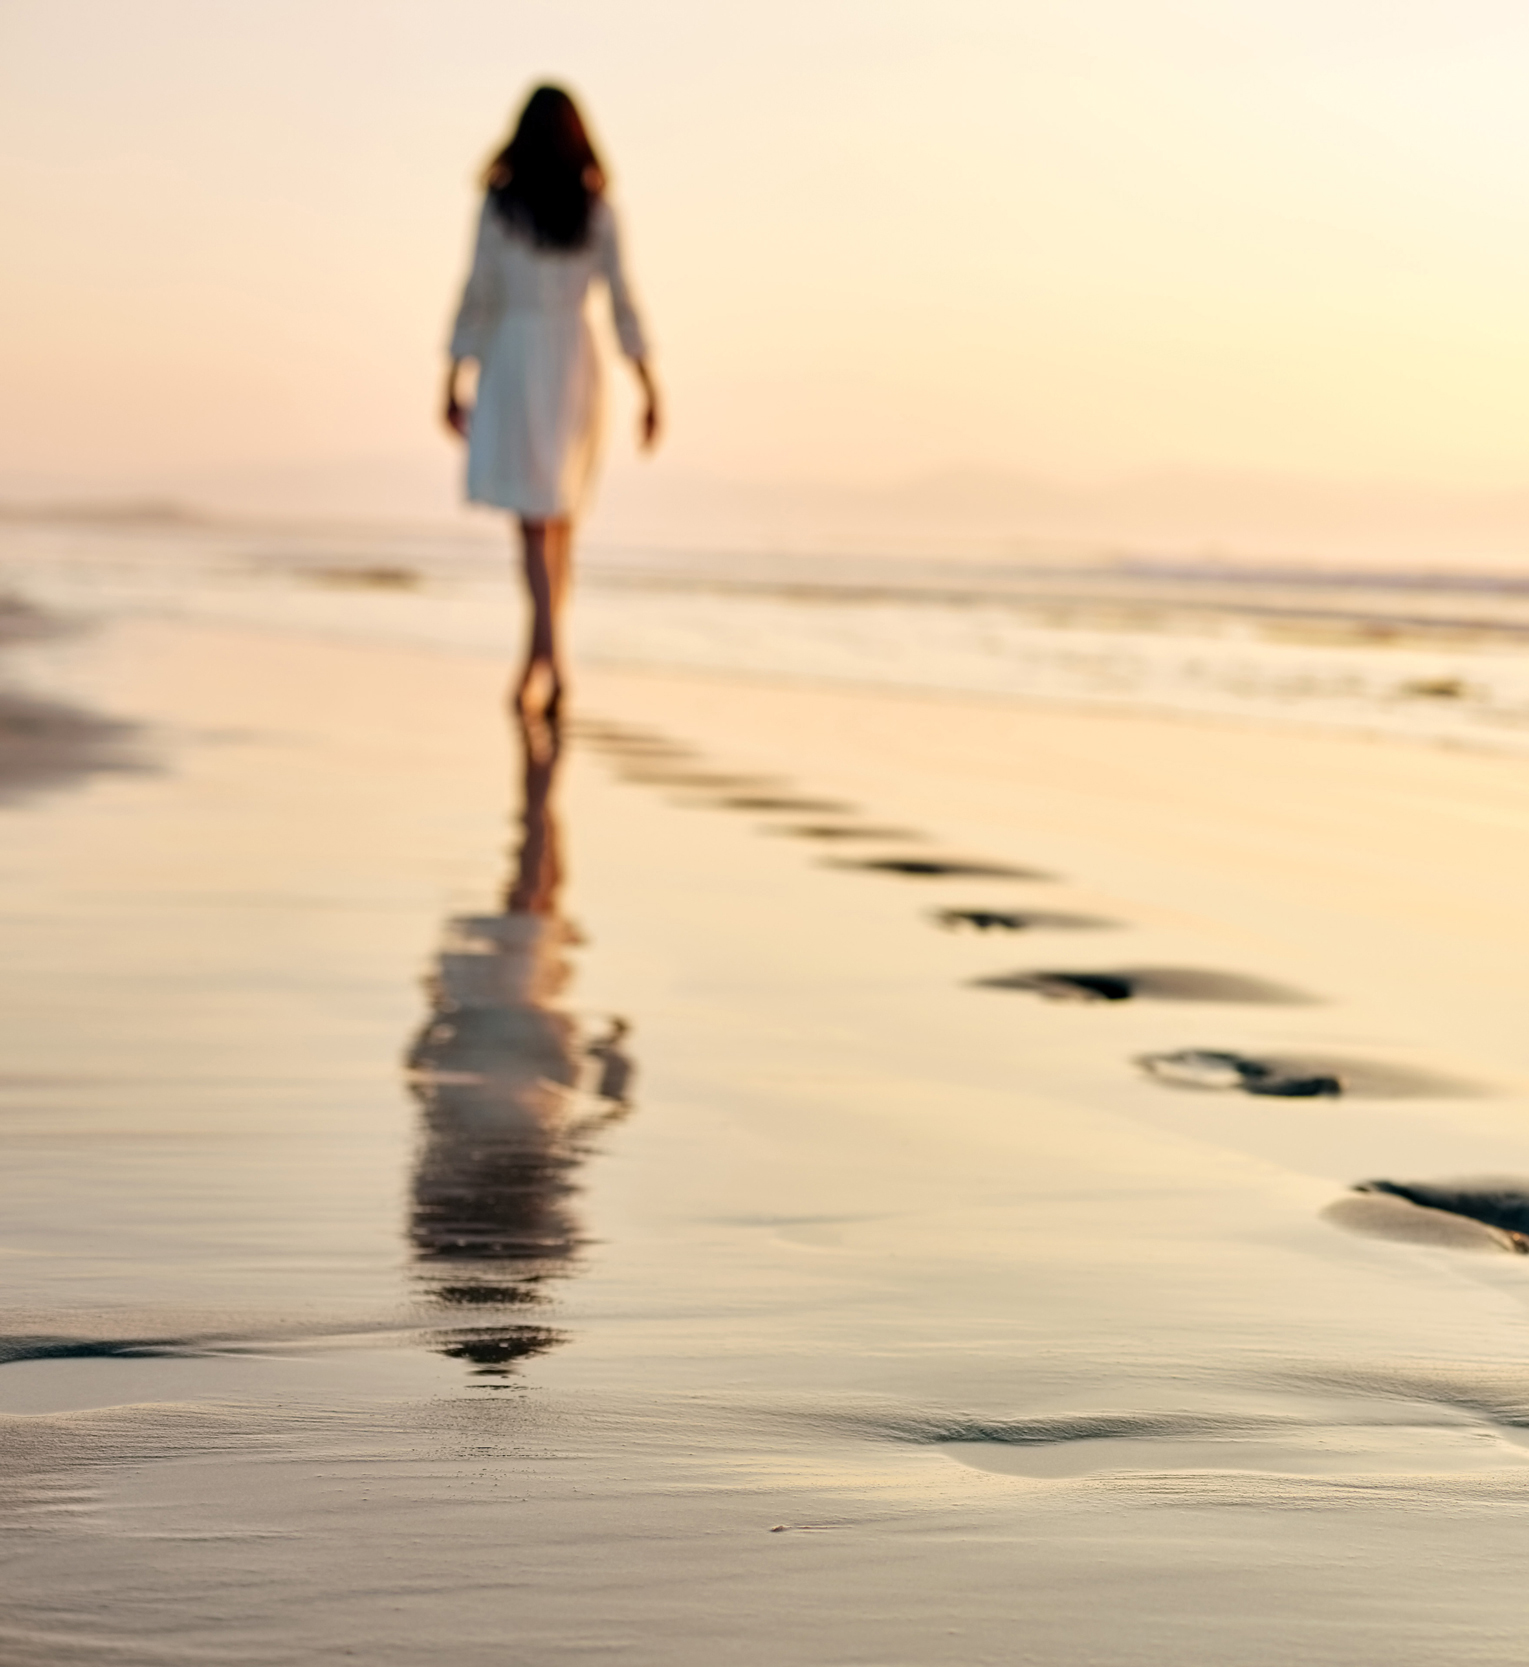 Woman walking along the beach shore leaving footprints in the sand at sunset